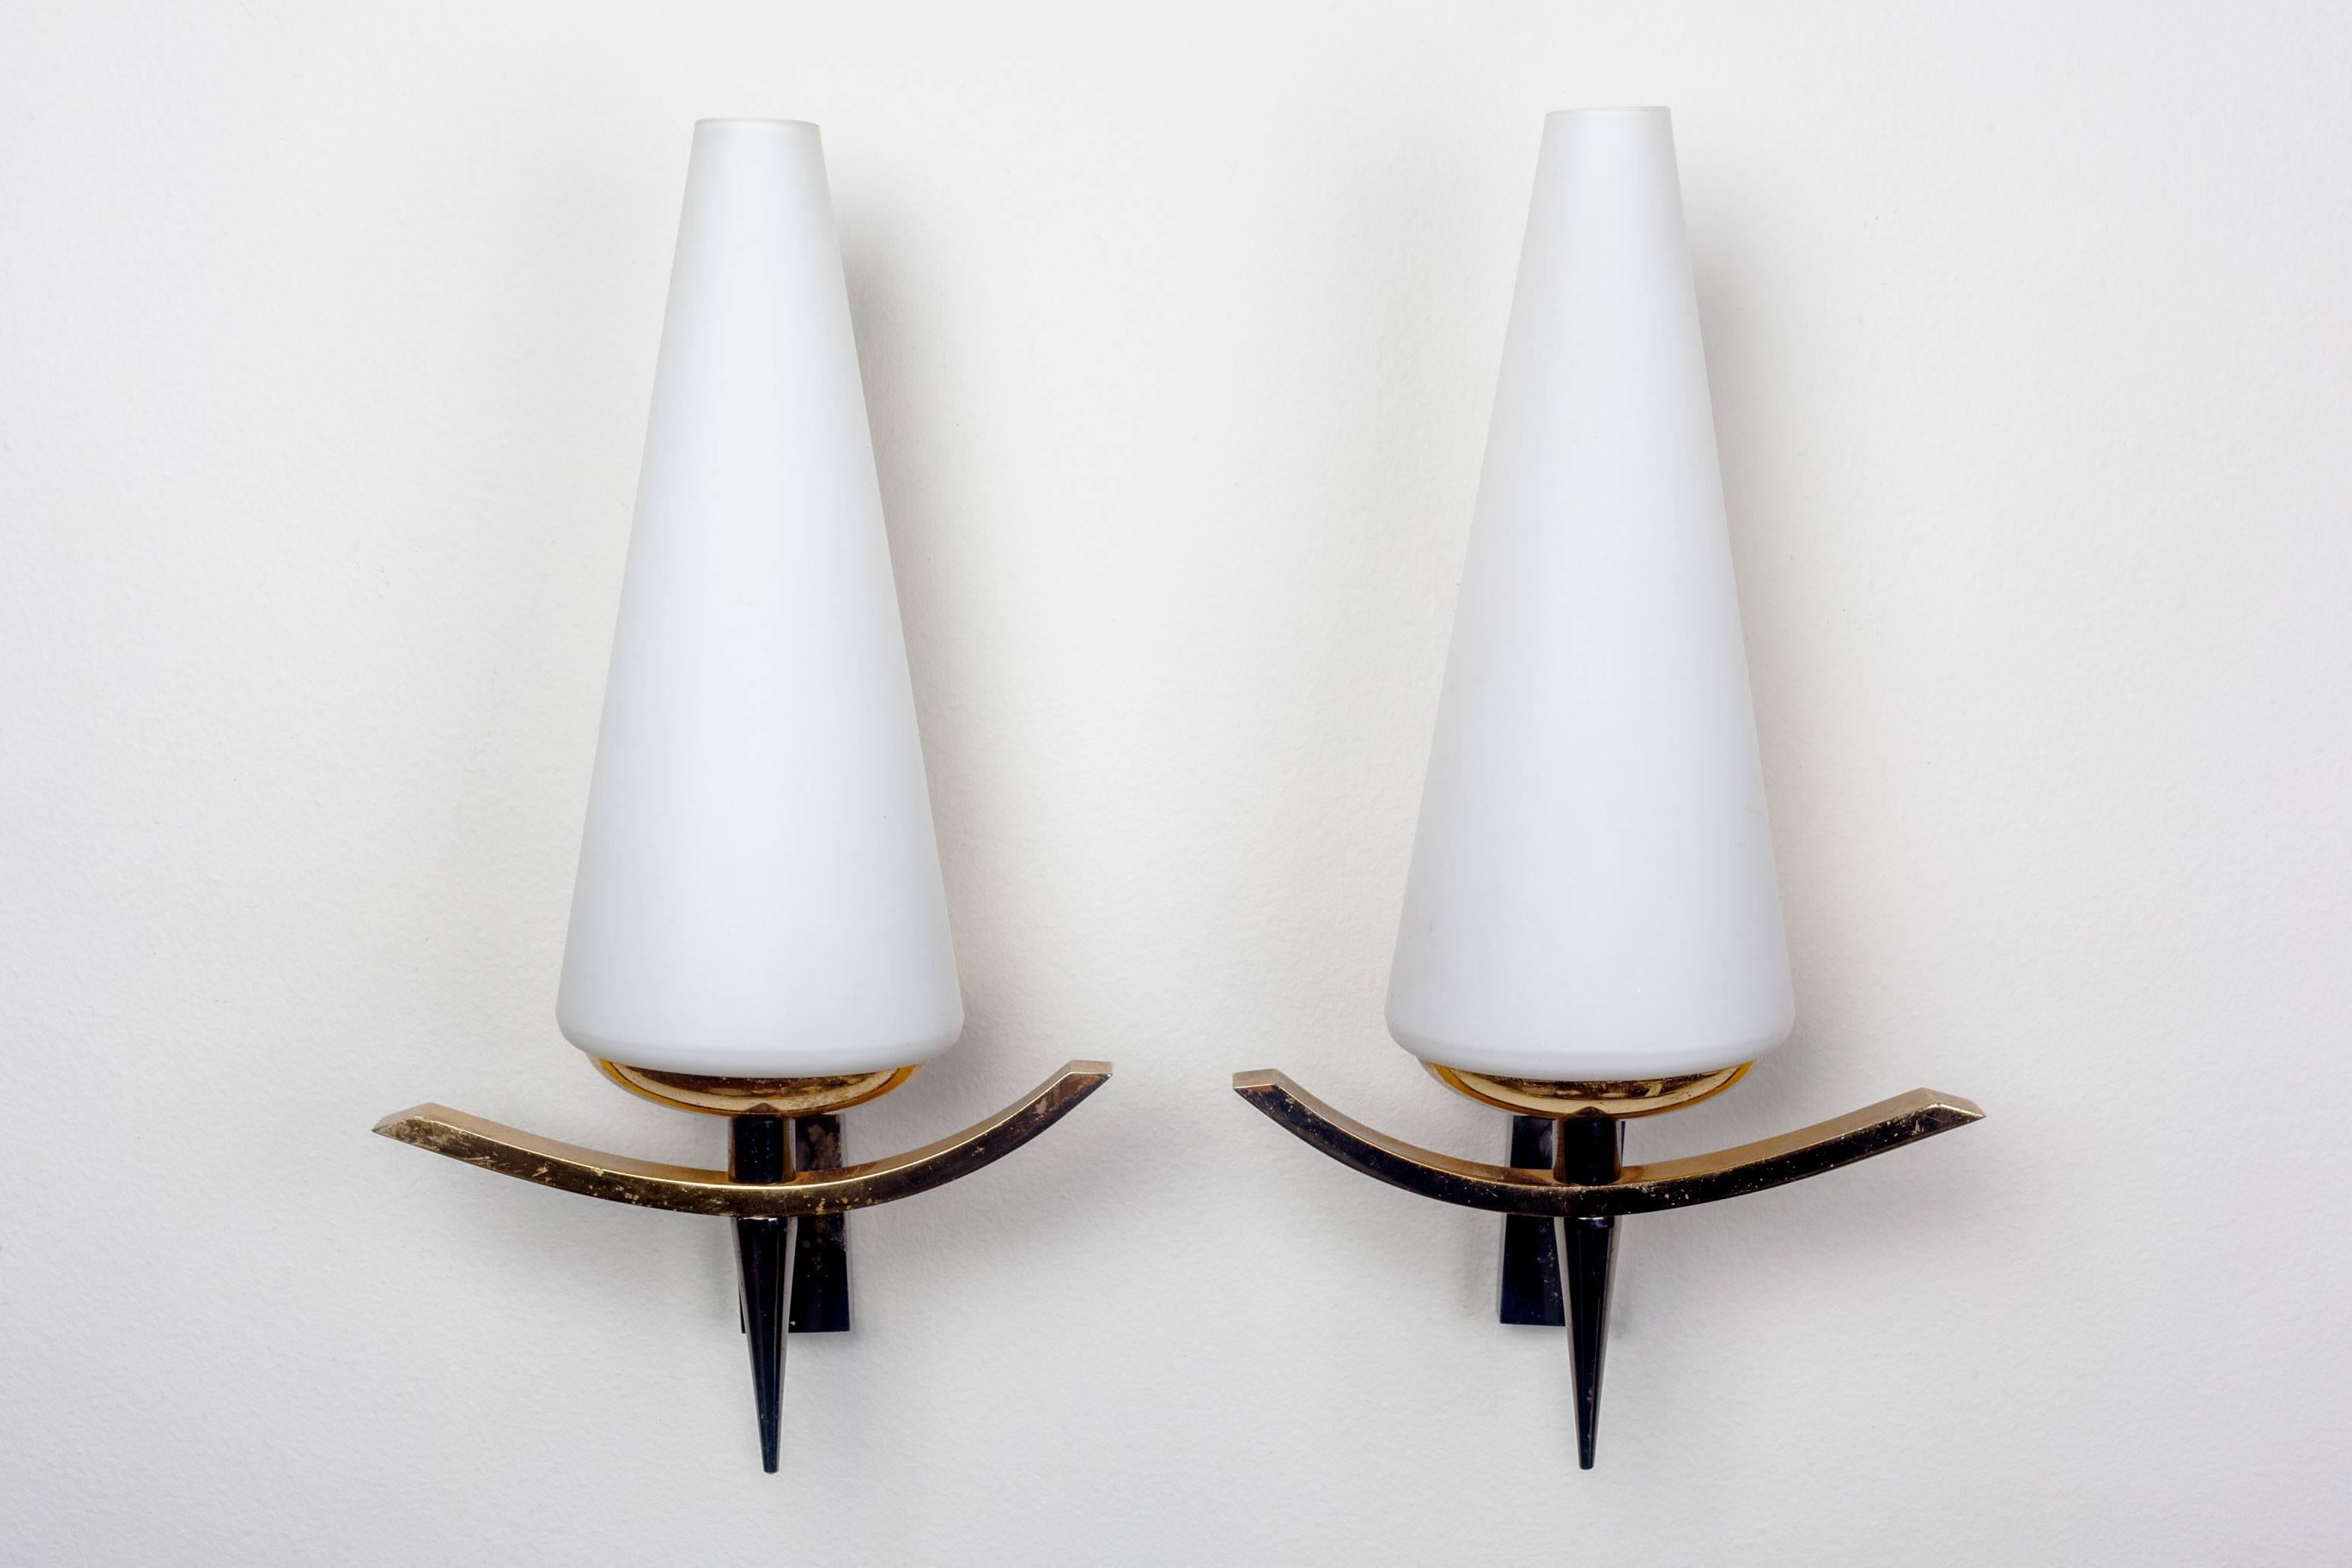 Mid-century French sconces with conic, opaline glass shades, and dark metal and brass bases in distinctive cross bow shape. Each having a significant weight, these two vintage wall lamps are robust. They will enrich their environment with their